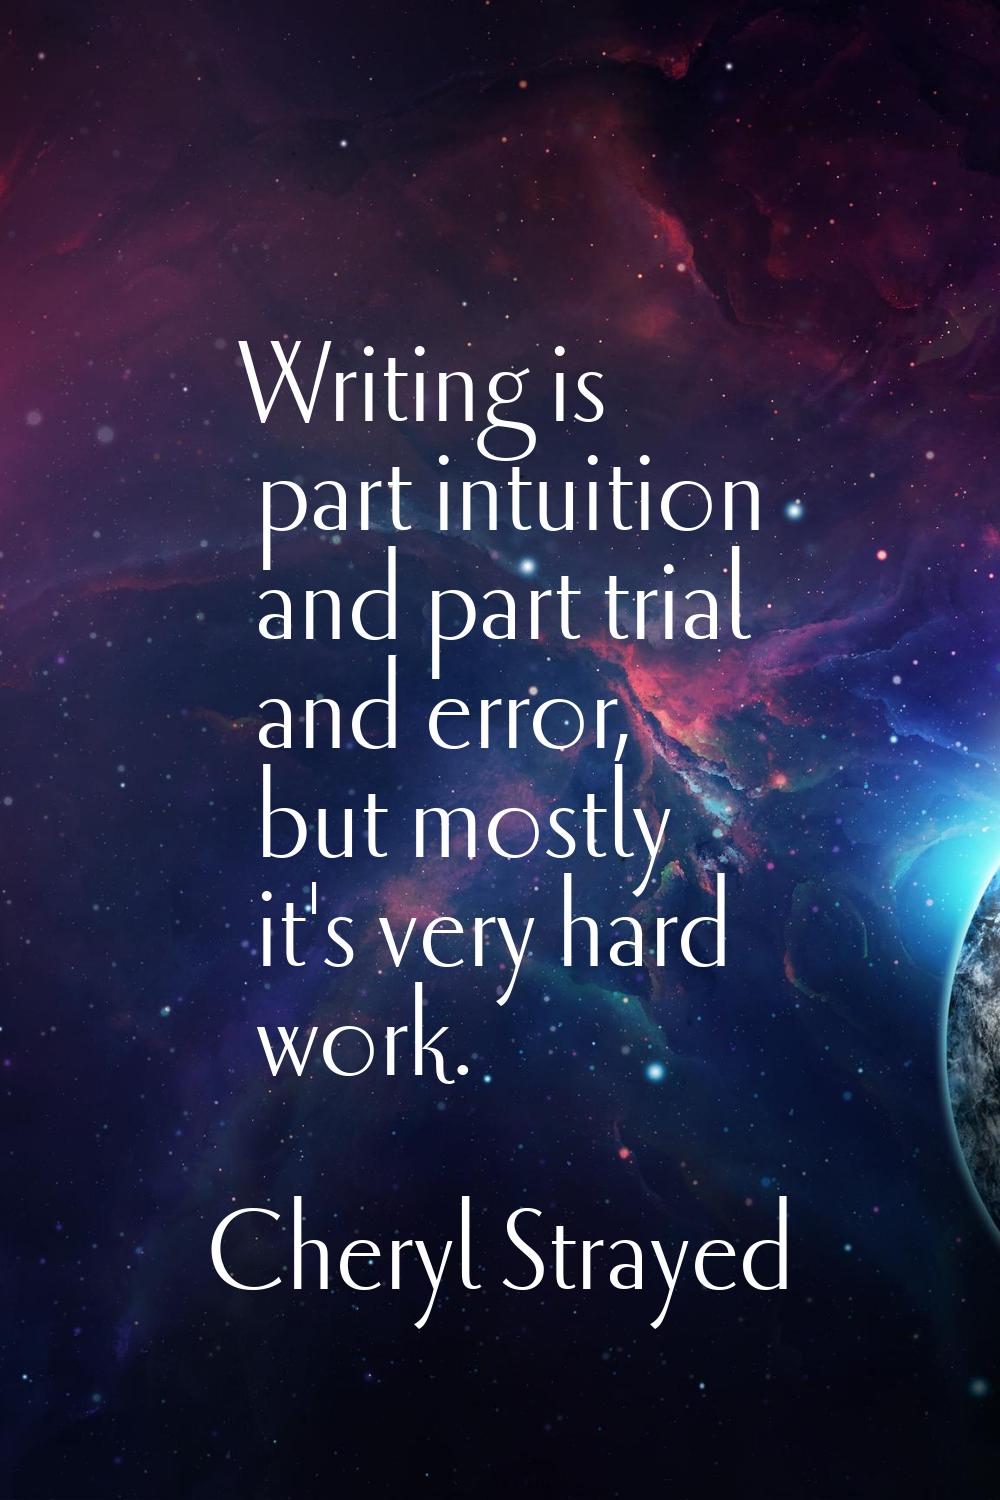 Writing is part intuition and part trial and error, but mostly it's very hard work.